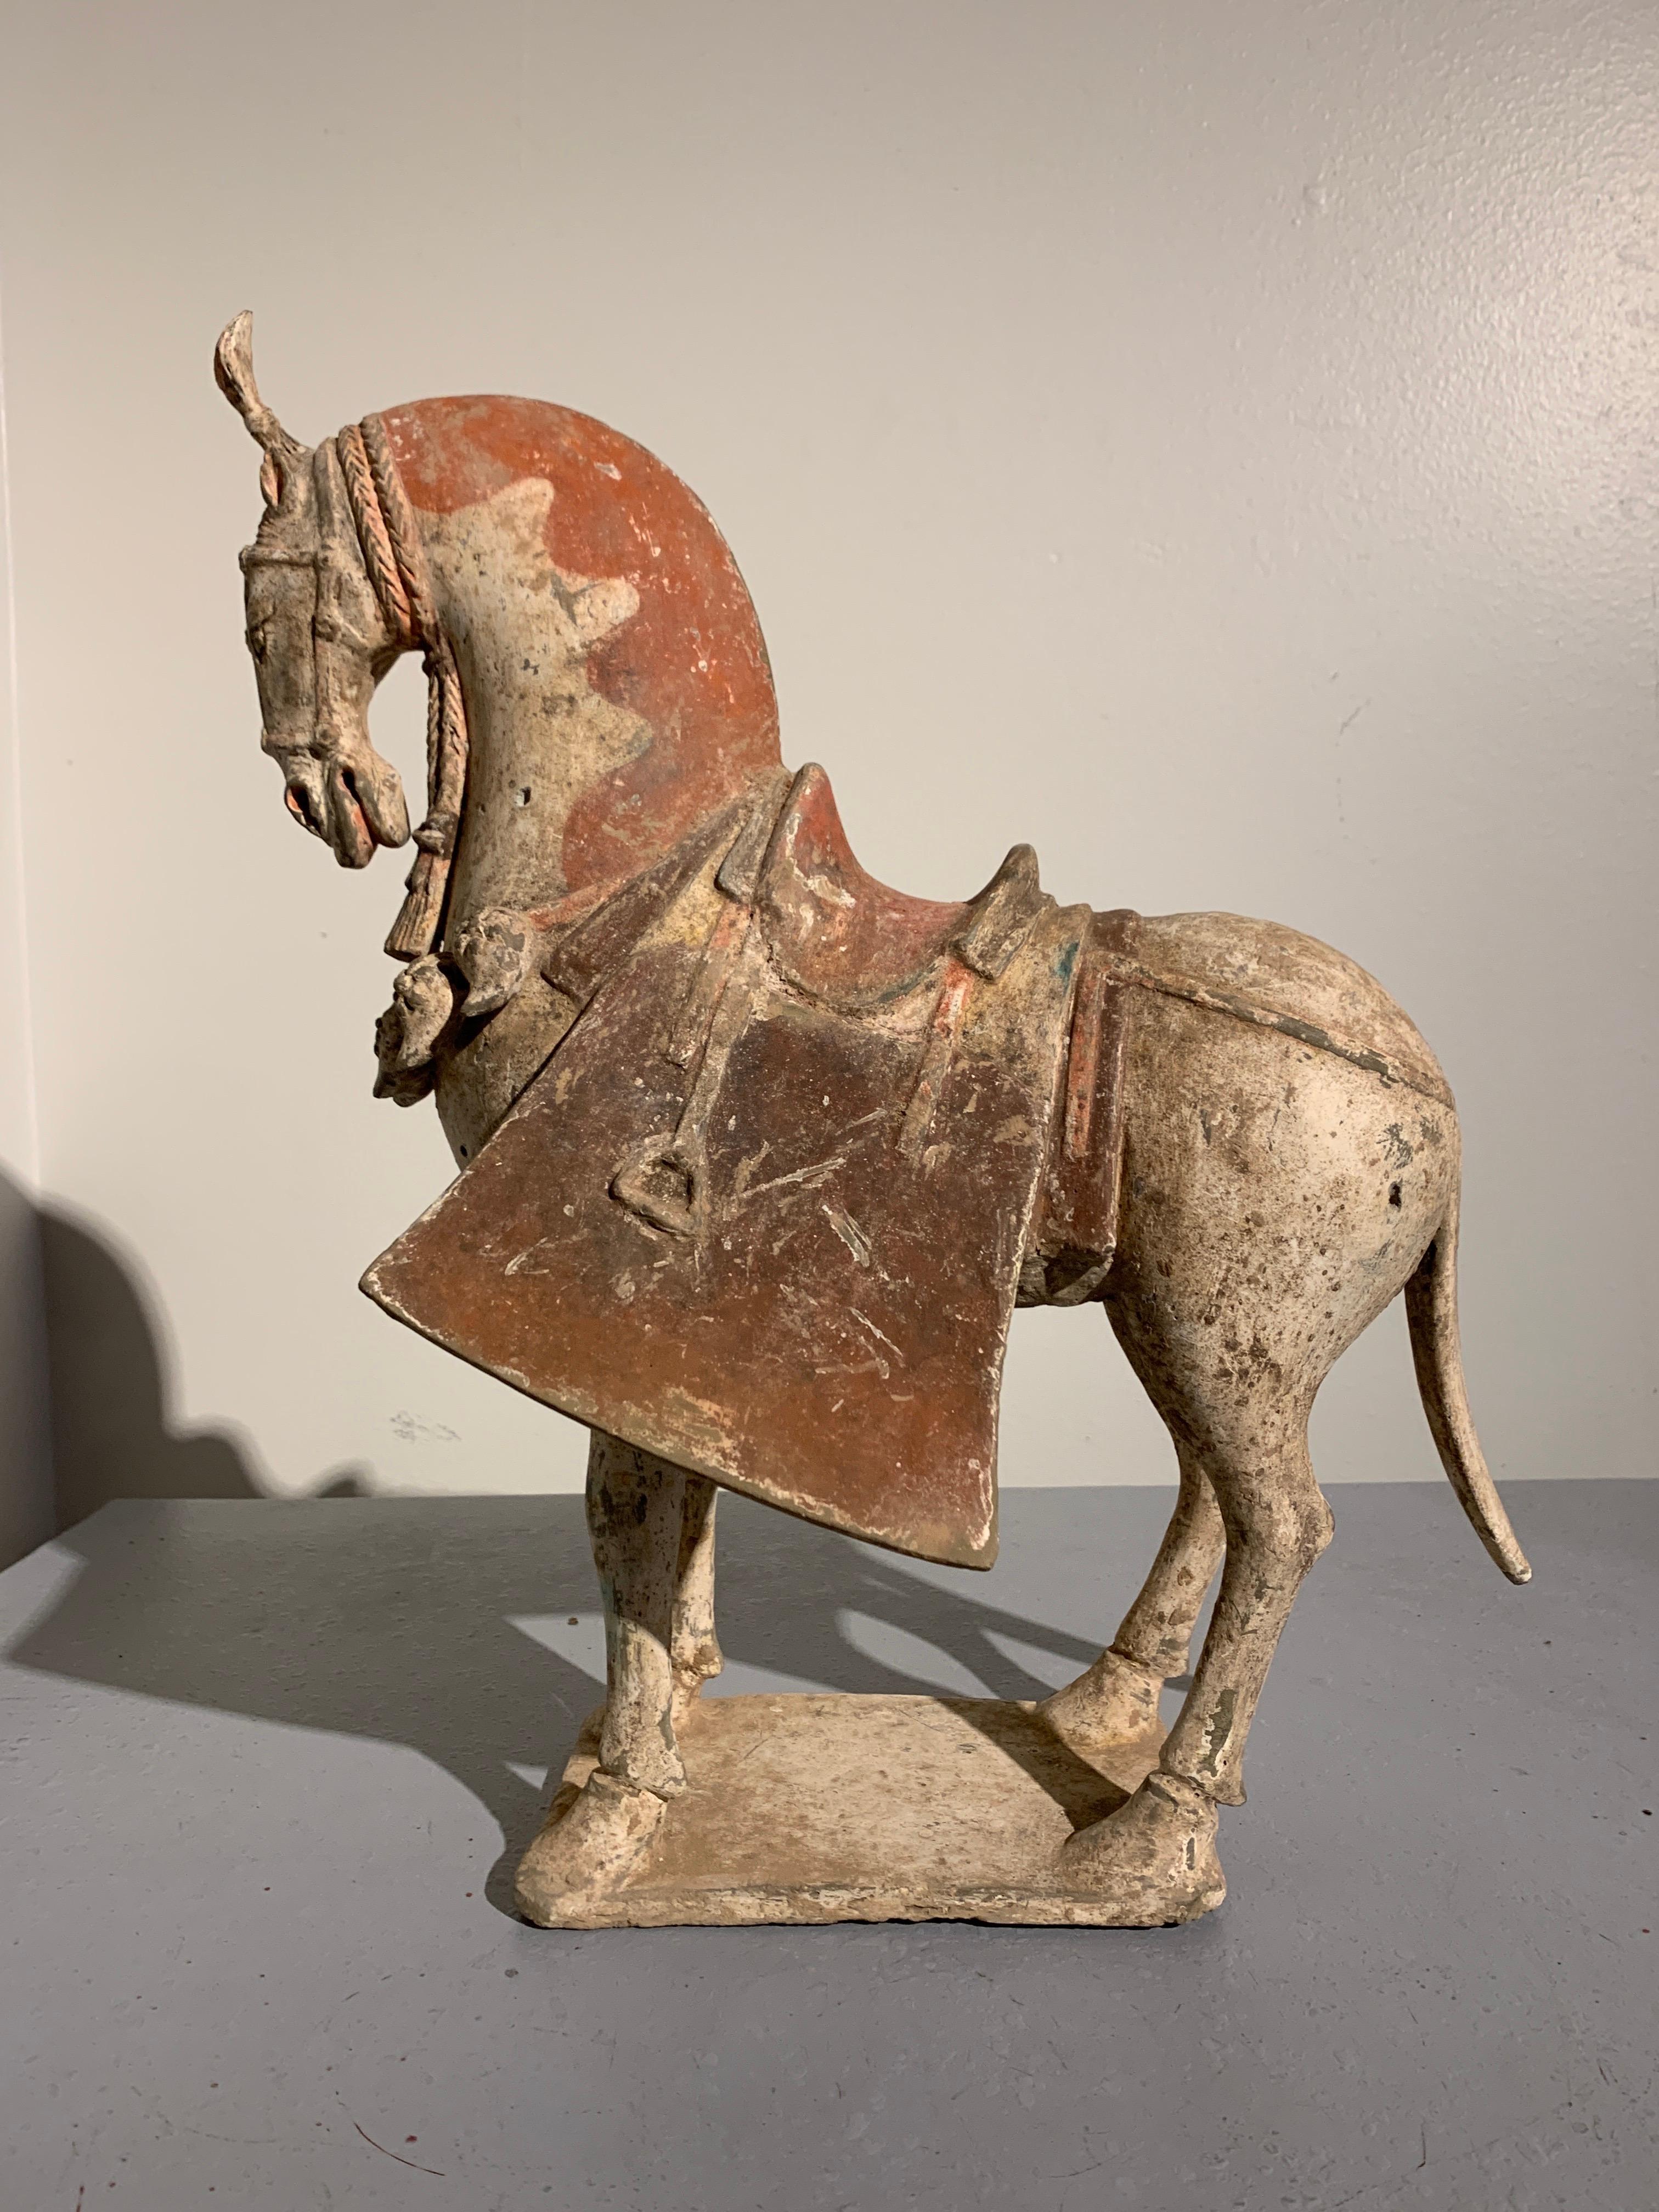 A magnificent and rare painted pottery model of a caparisoned horse, Northern Wei Dynasty (386 to 534), 5th-6th century, China. 

The noble beast is portrayed standing foursquare upon a rectangular plinth, looking downwards, its long, thick neck